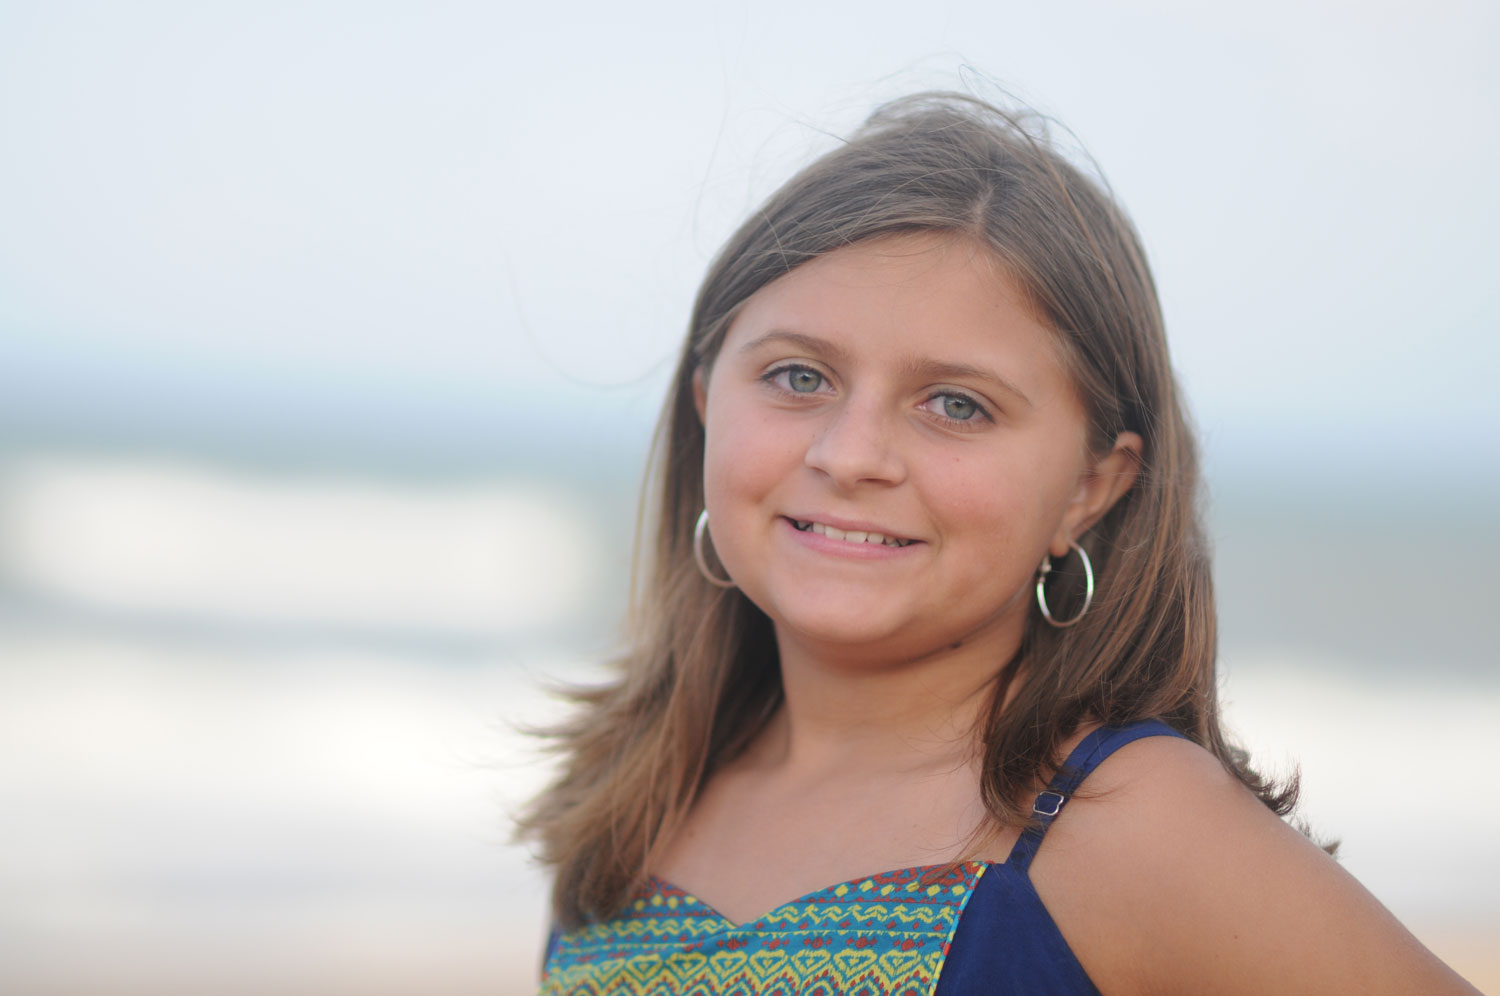 Little Miss Flagler County 2011 Contestants, Ages 8-11 